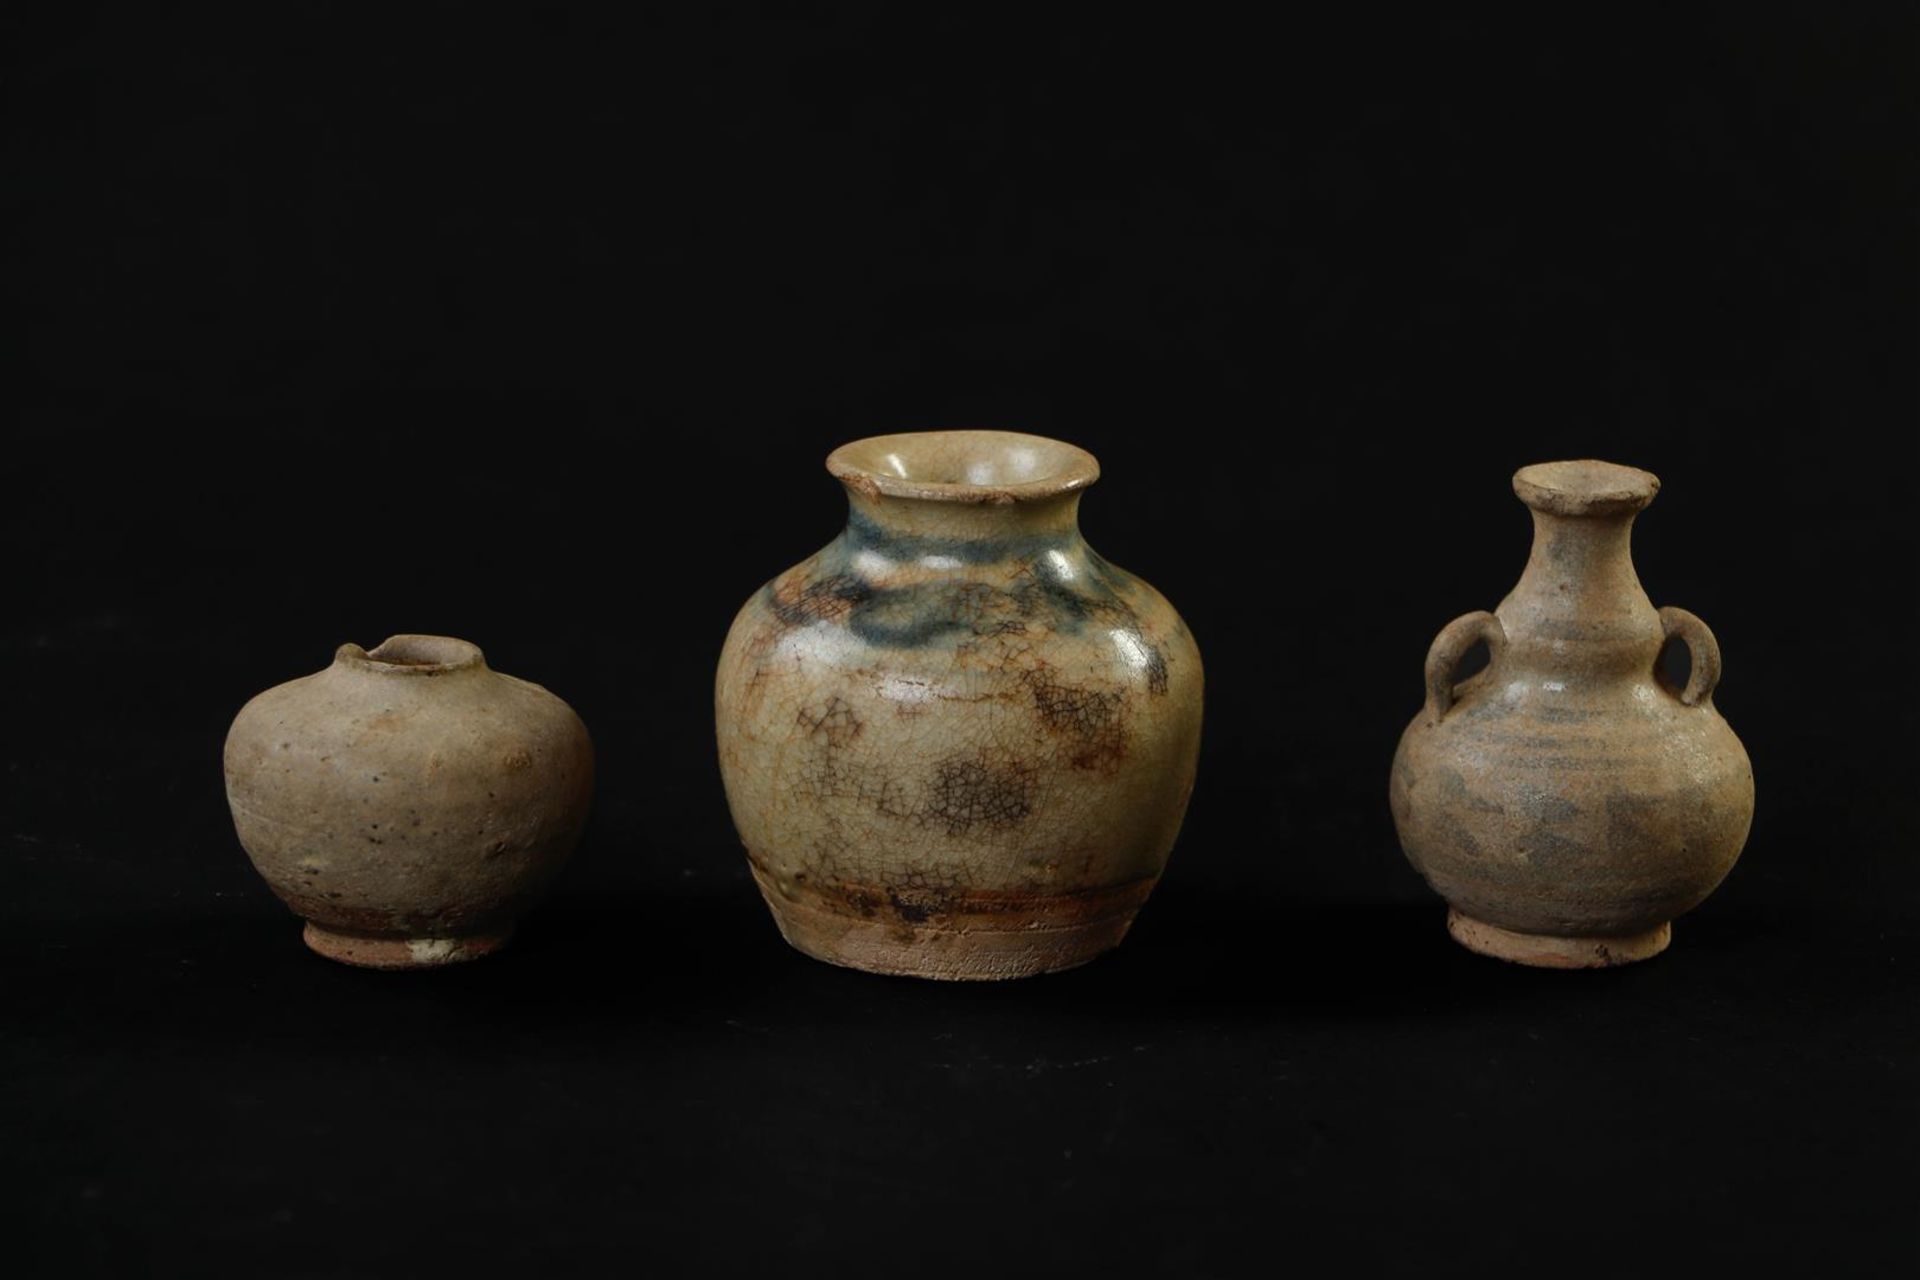 Lot of two ointment jars and a gourd model with ears, Ming period.
H. 9 cm.